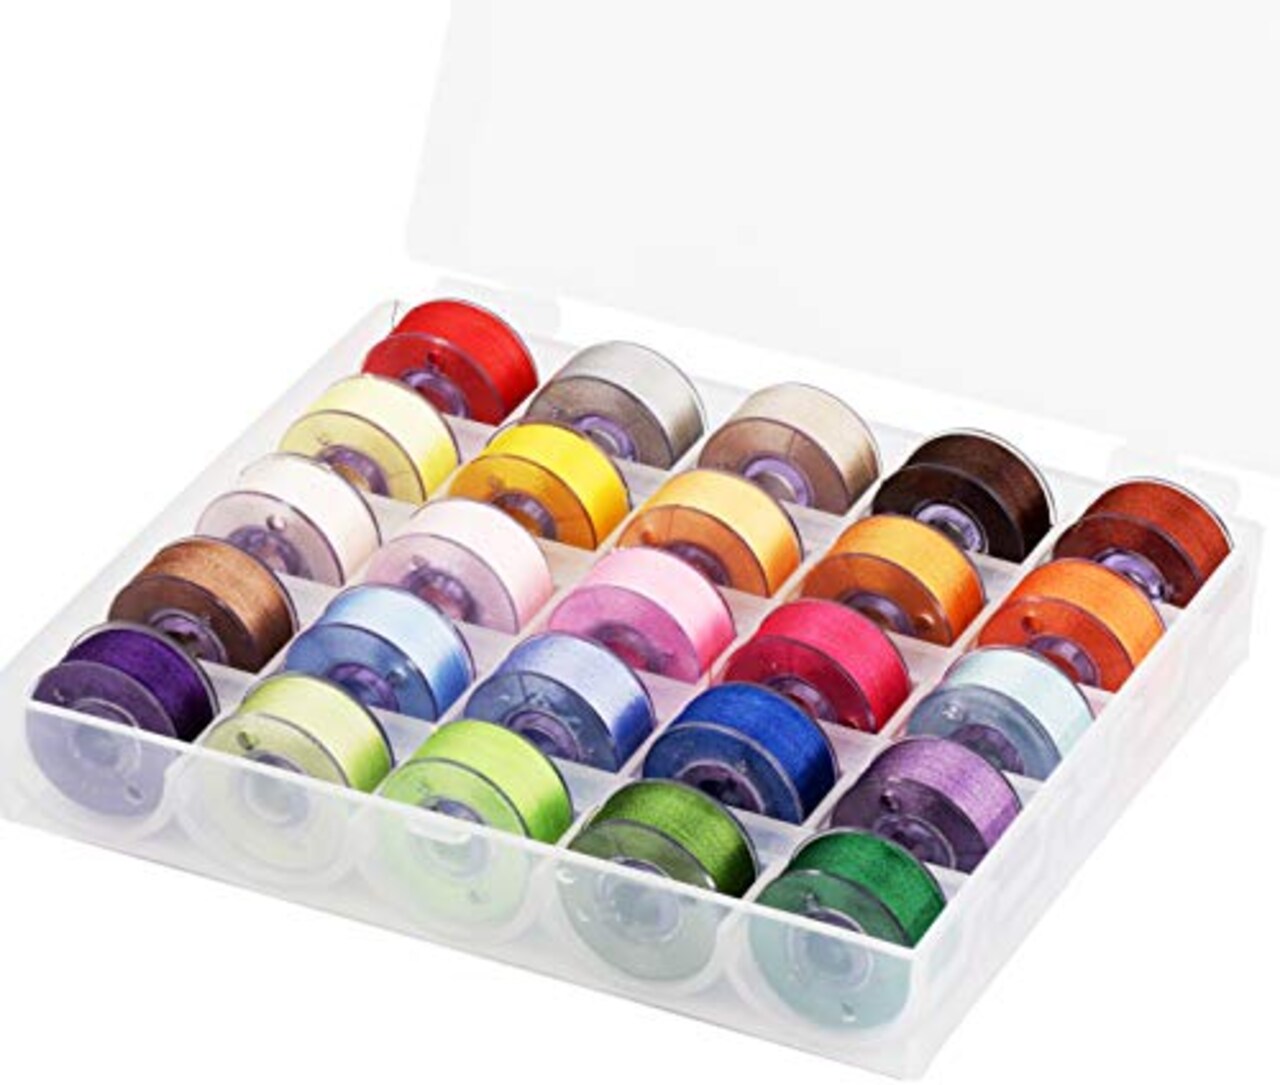 Simthread 25pcs Assorted Colors Size A Class 15 (SA156) 60WT Prewound  Bobbins Thread with Clear Storage Plastic Box for Brother Embroidery Thread  Sewing Thread Machine DIY